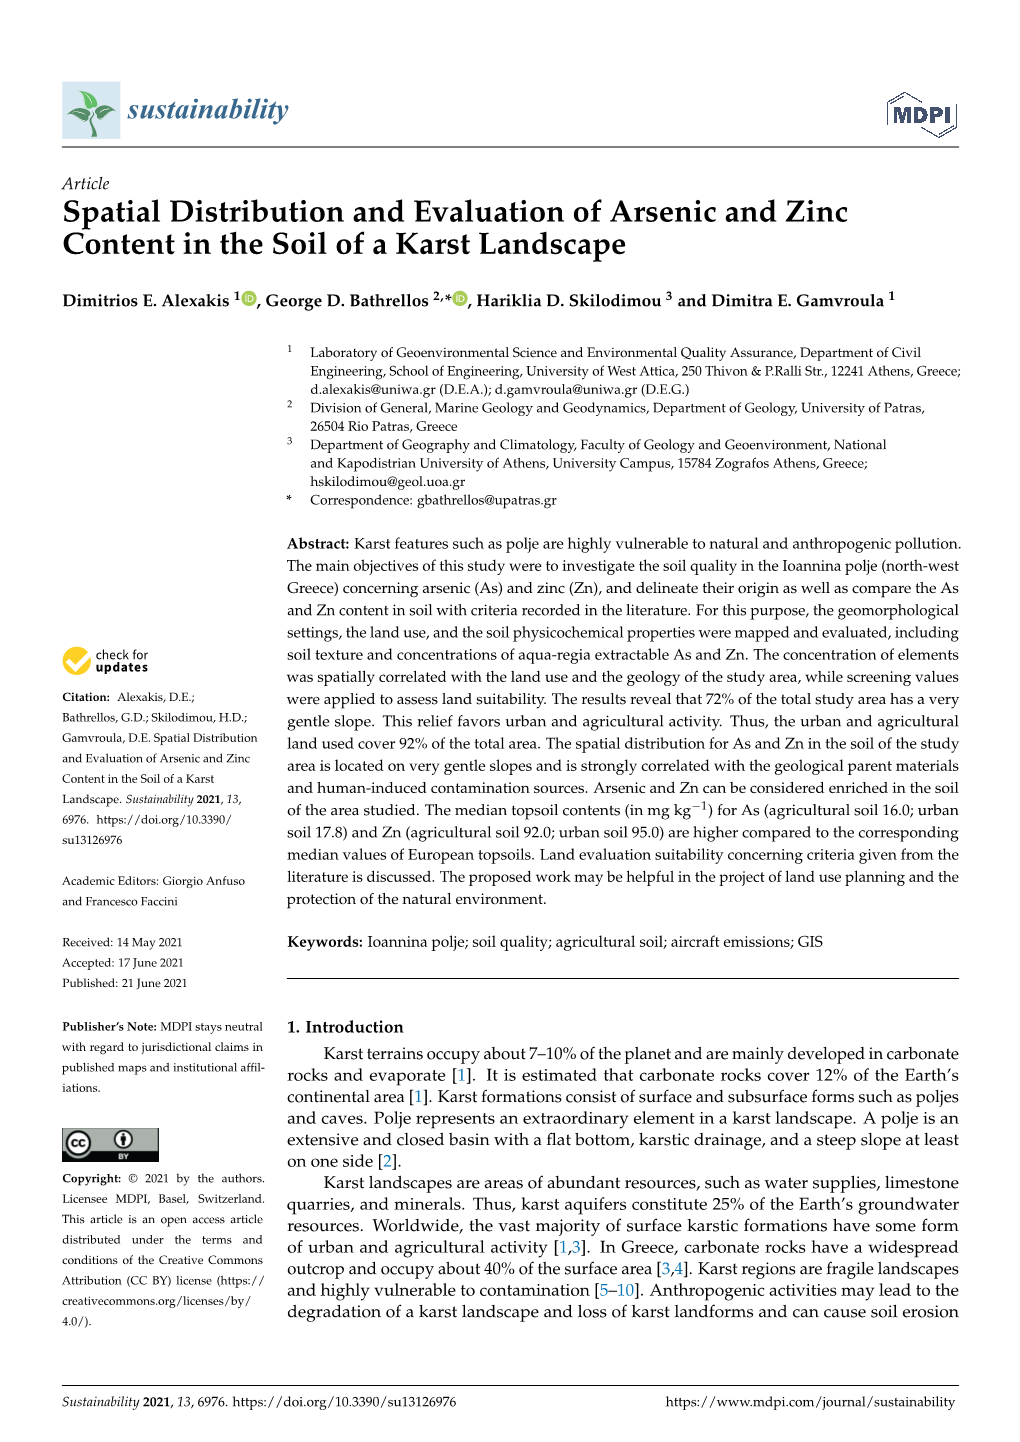 Spatial Distribution and Evaluation of Arsenic and Zinc Content in the Soil of a Karst Landscape